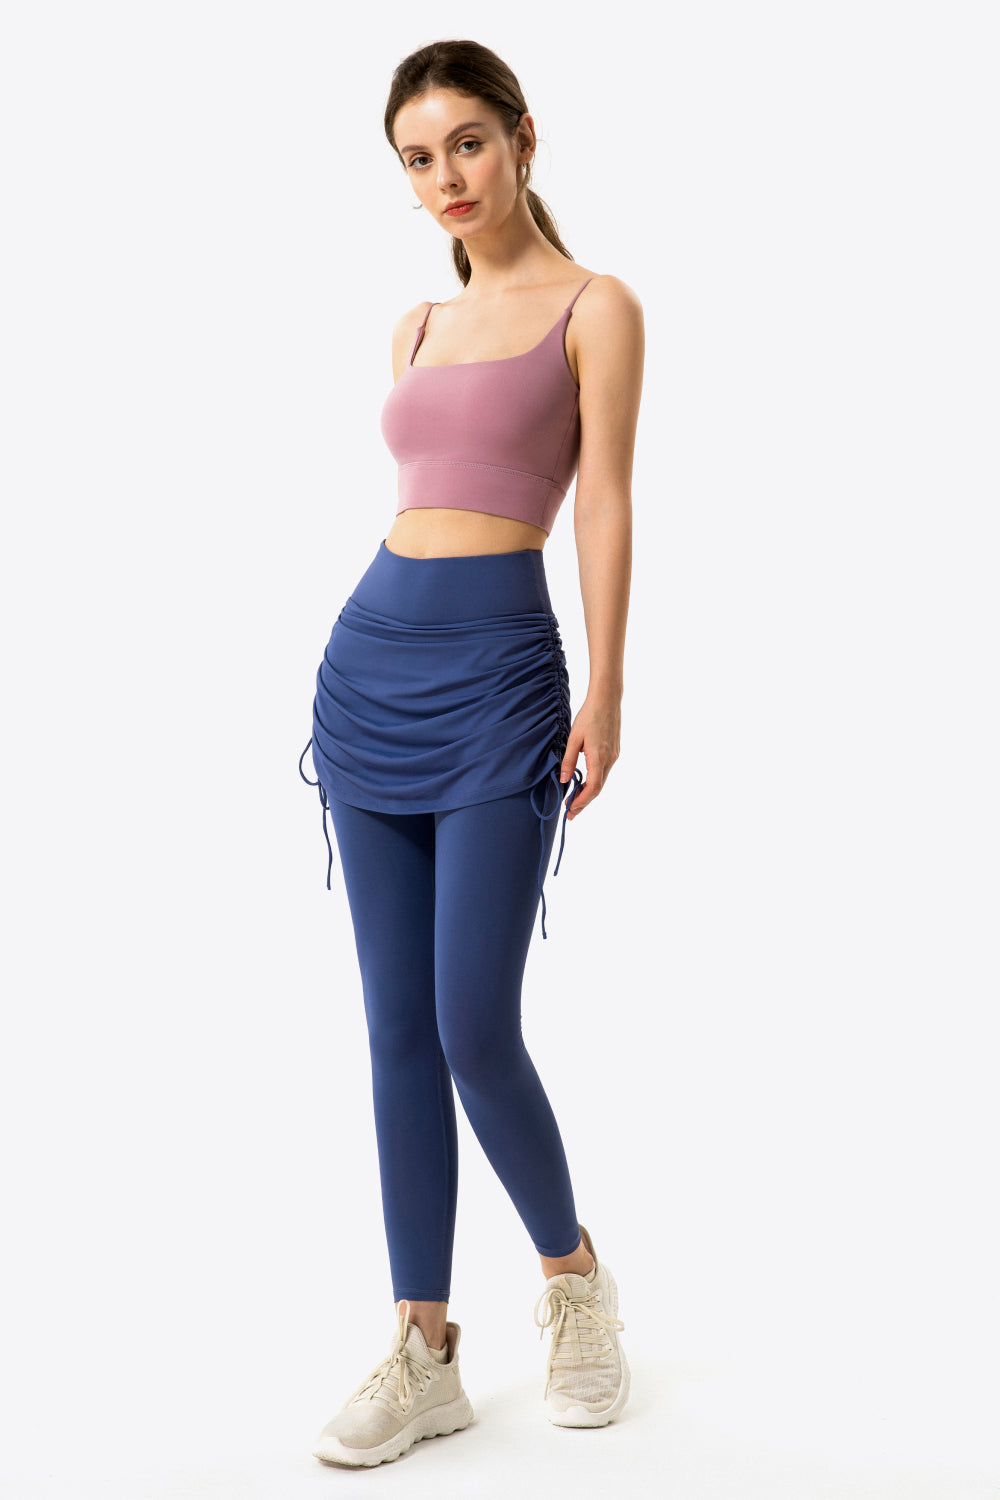 Drawstring Ruched Faux Layered Yoga Leggings - Kawaii Stop - Activewear, Comfortable Fit, Drawstring, Fitness Leggings, Leggings, Machine Washable, Modern Elegance, Polyester Blend, Ruched Design, Ship From Overseas, Solid Color, Spandex, Stylish Design, Trendy Details, Versatile Apparel, Women's Clothing, Yoga Leggings, ZJtree